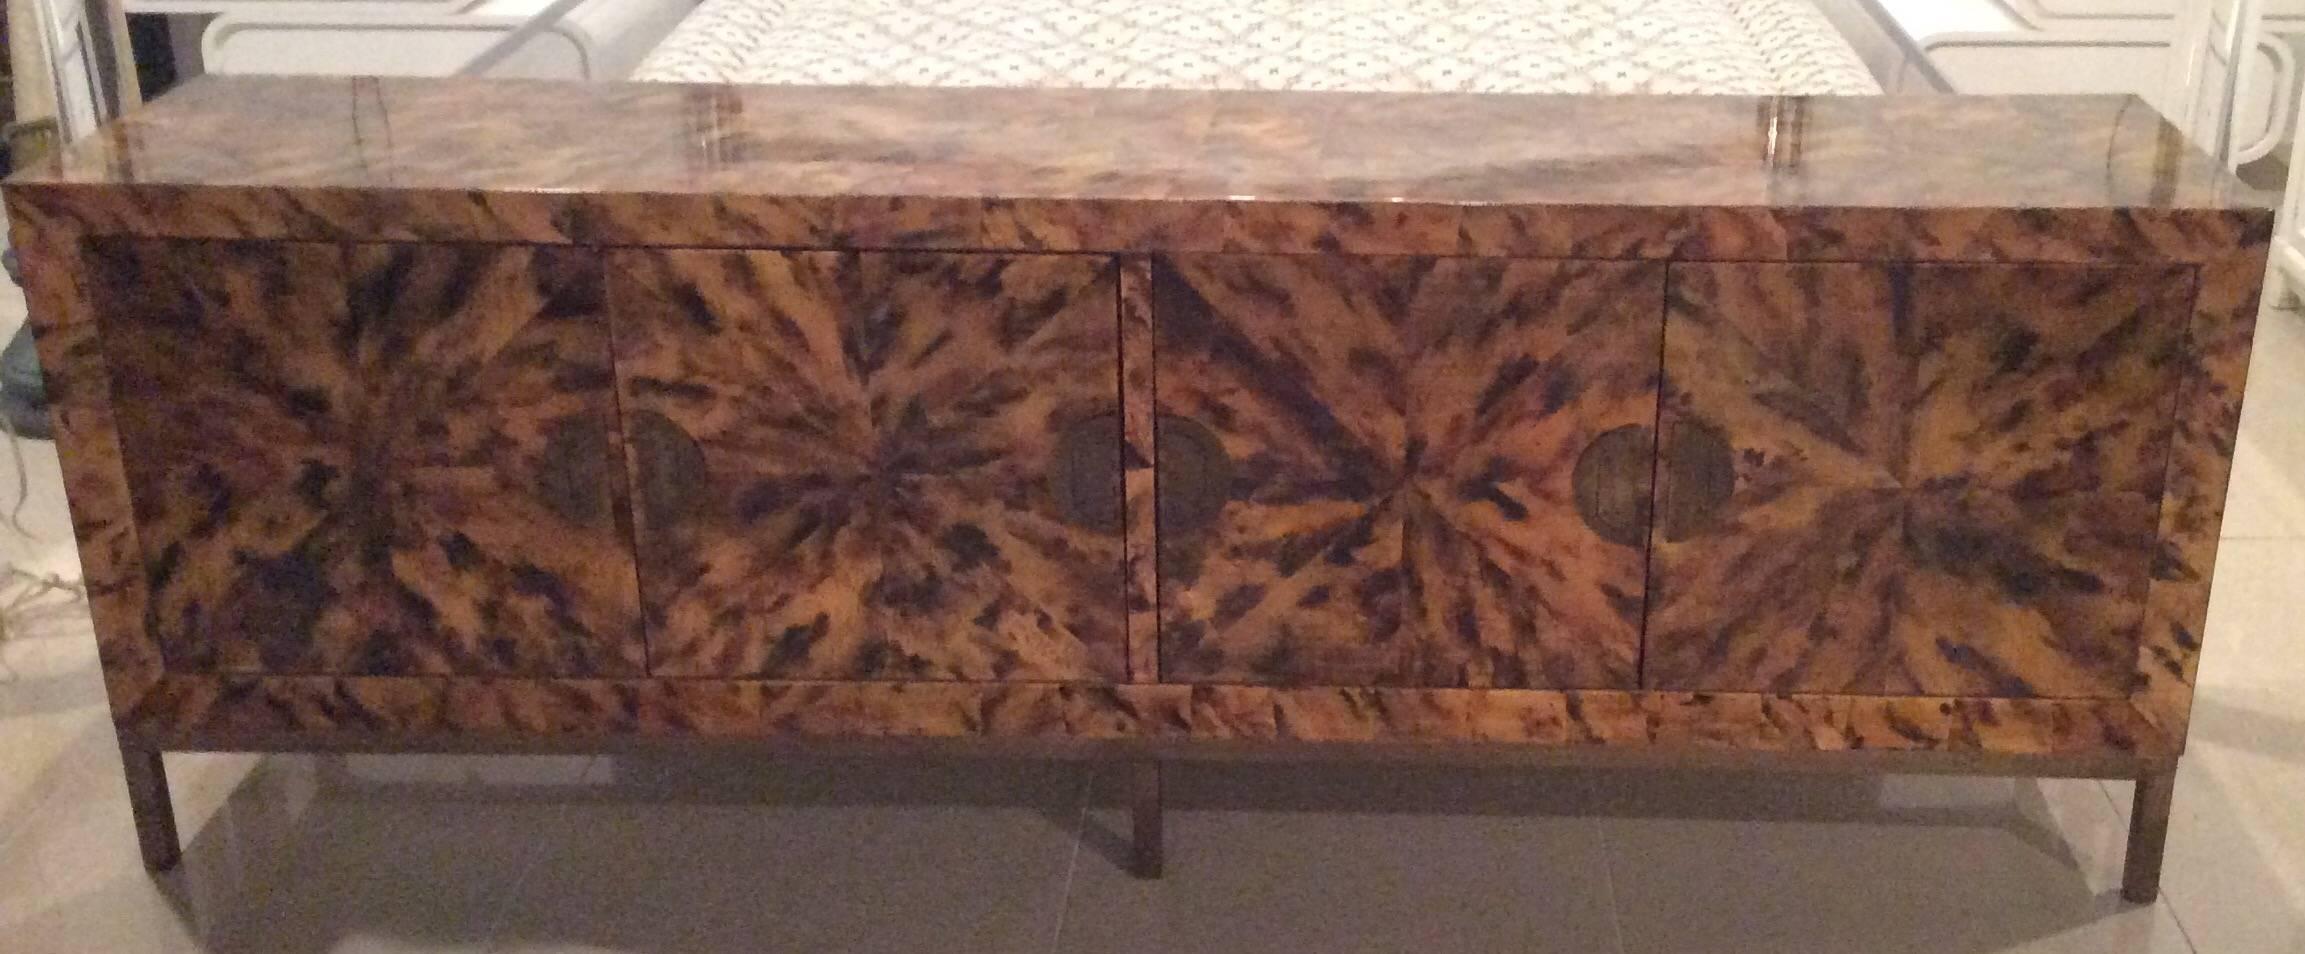 Such an amazing, one of a kind credenza, buffet, dresser. Four doors open to cabinet (inside shown) Unique brass hardware and brass base. Patchwork tortoise shell finish with shiny lacquered top coat.